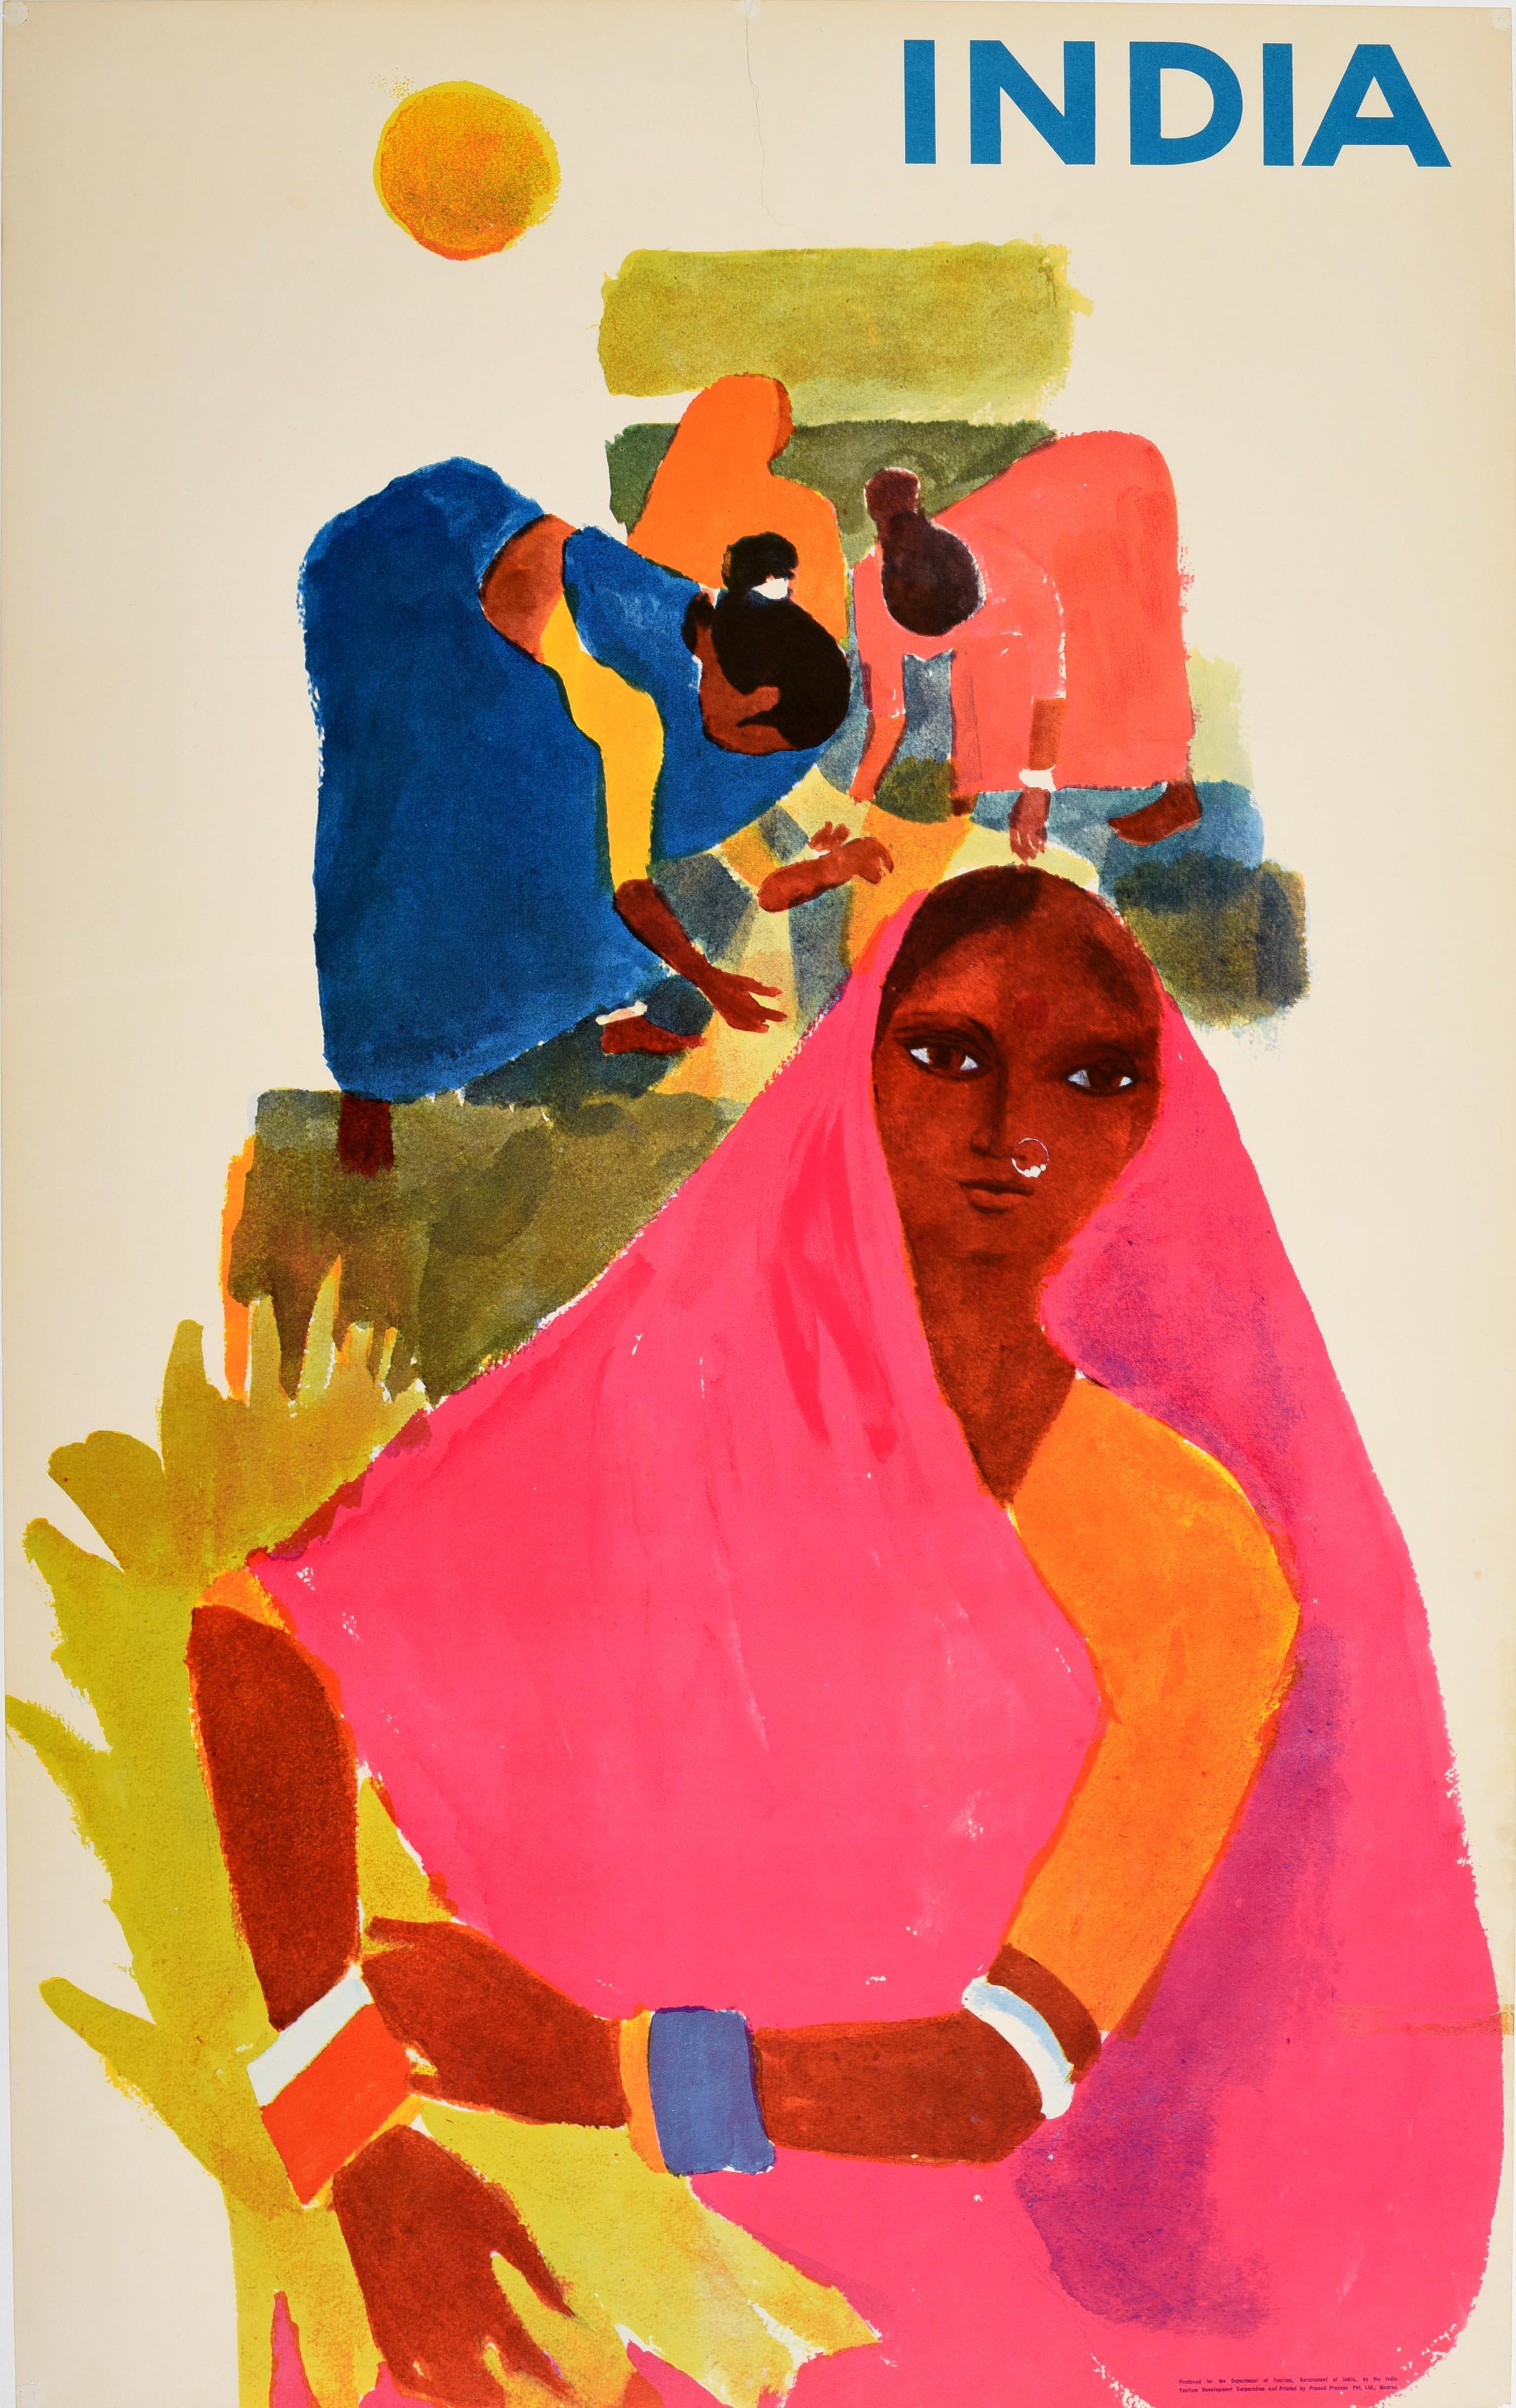 Original vintage travel poster for India featuring colourful artwork of people working on a field with a lady in the foreground and a sun in the sky next to the bold blue title text. Produced for the Department of Tourism Government of India and